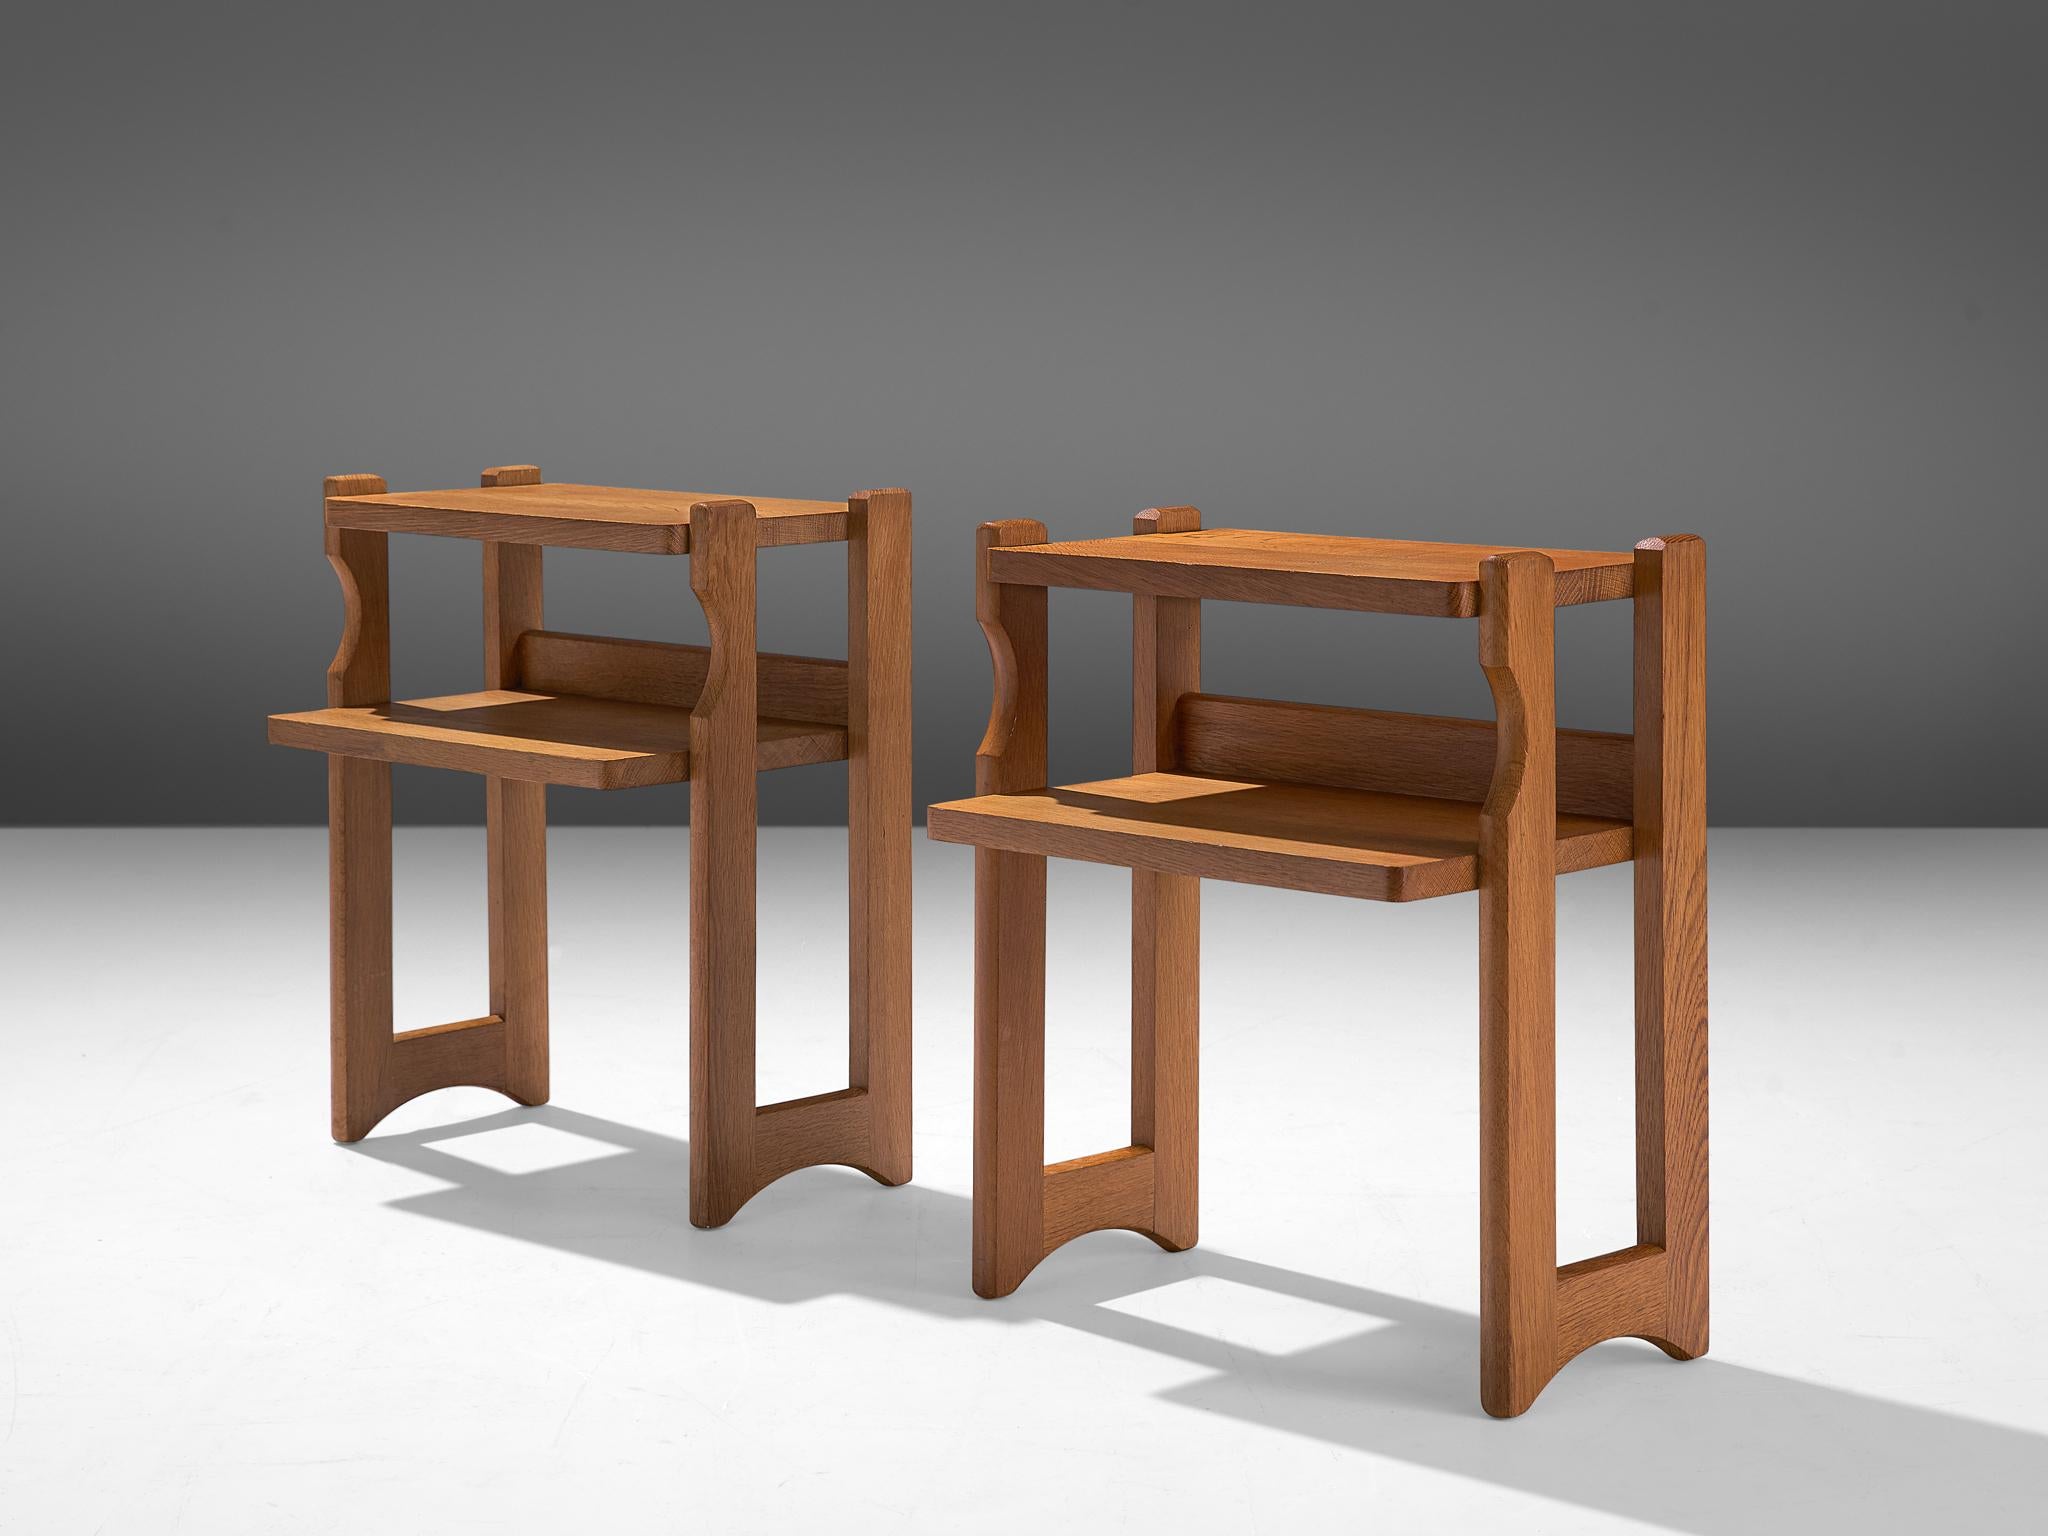 Guillerme et Chambron, nightstands, oak, France, 1960s.

Pair of nightstands with a geometric shape by Guillerme et Chambron. They are pretty corporal but are easy to lift and can be placed easily anywhere. These sculptural pieces sculptural legs